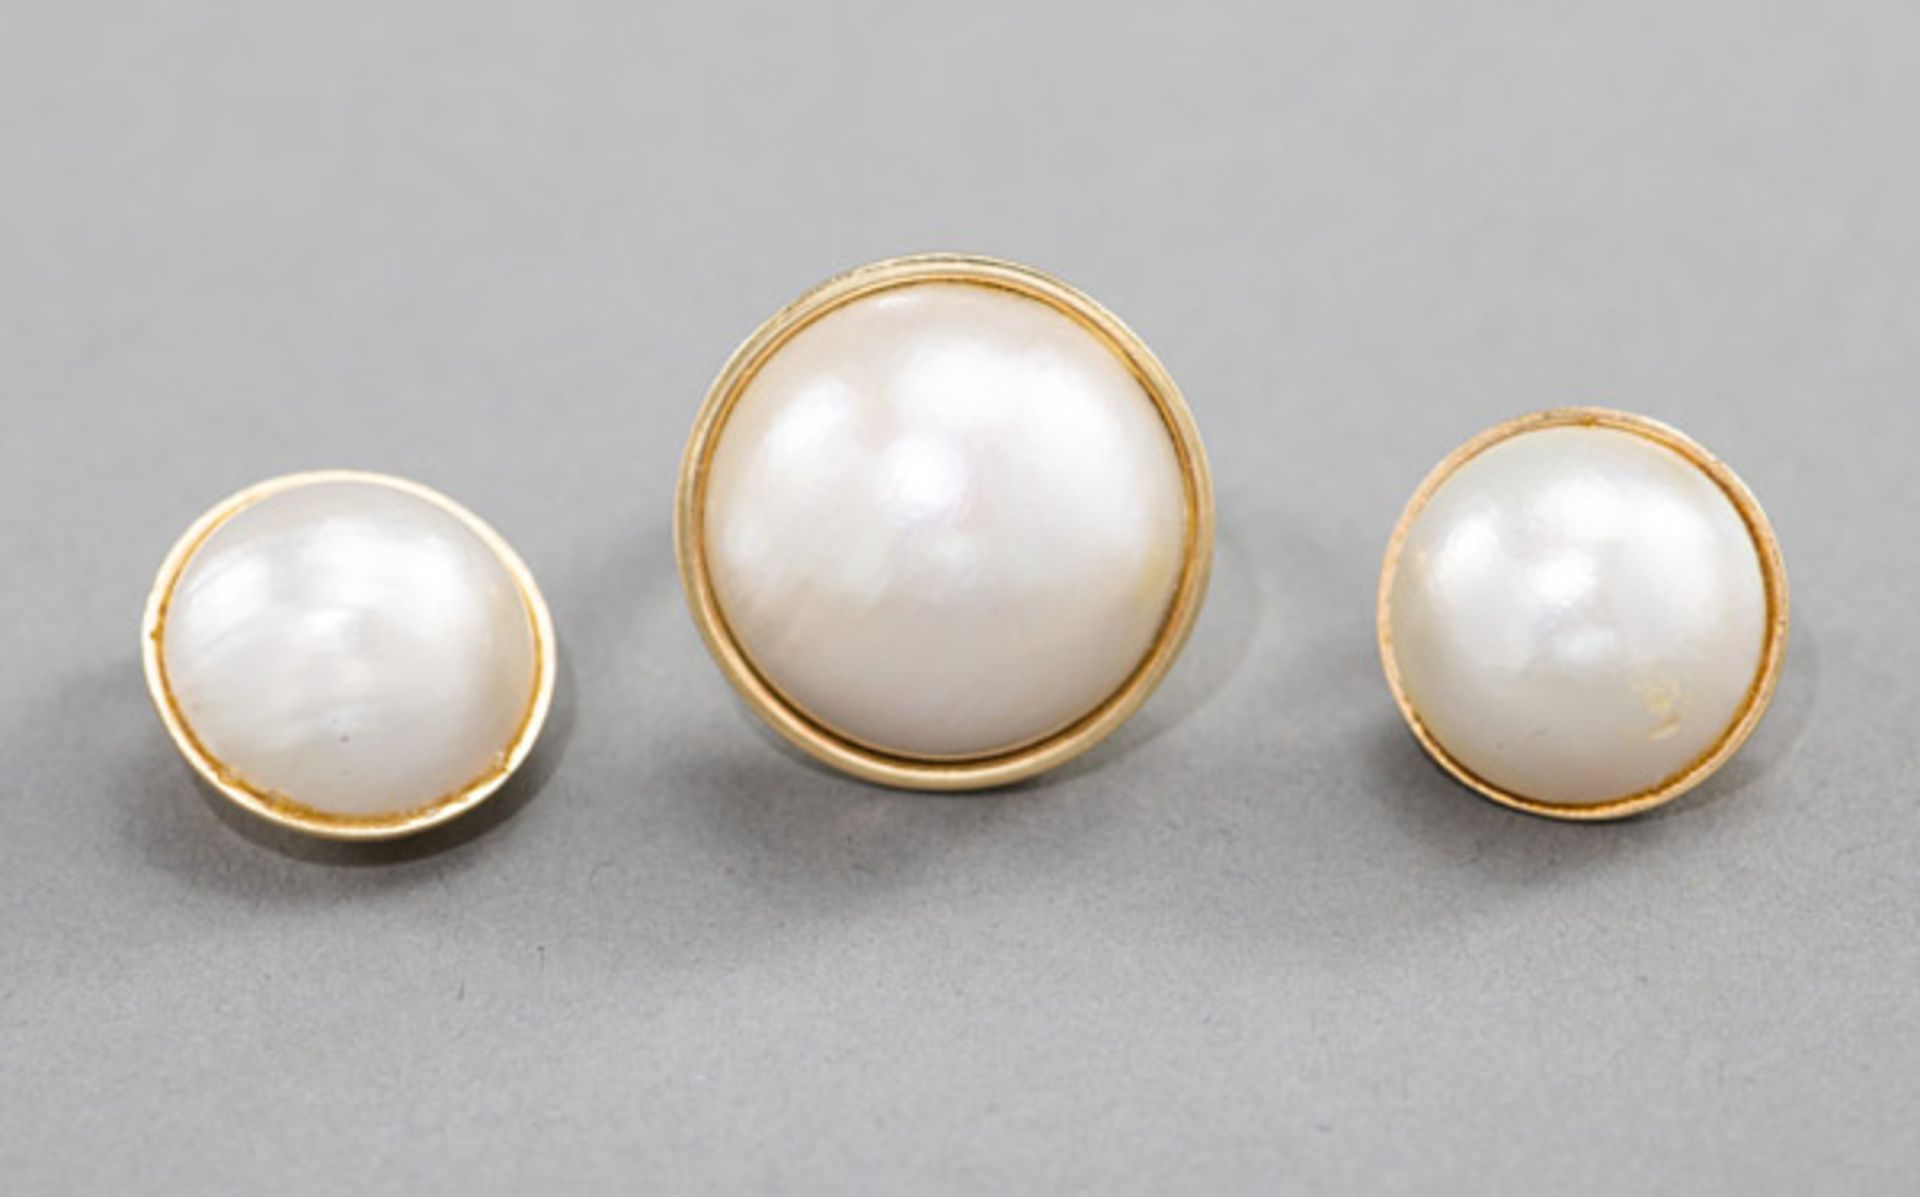 A PAIR OF PEARL EARCLIPS AND A RING - Image 3 of 3